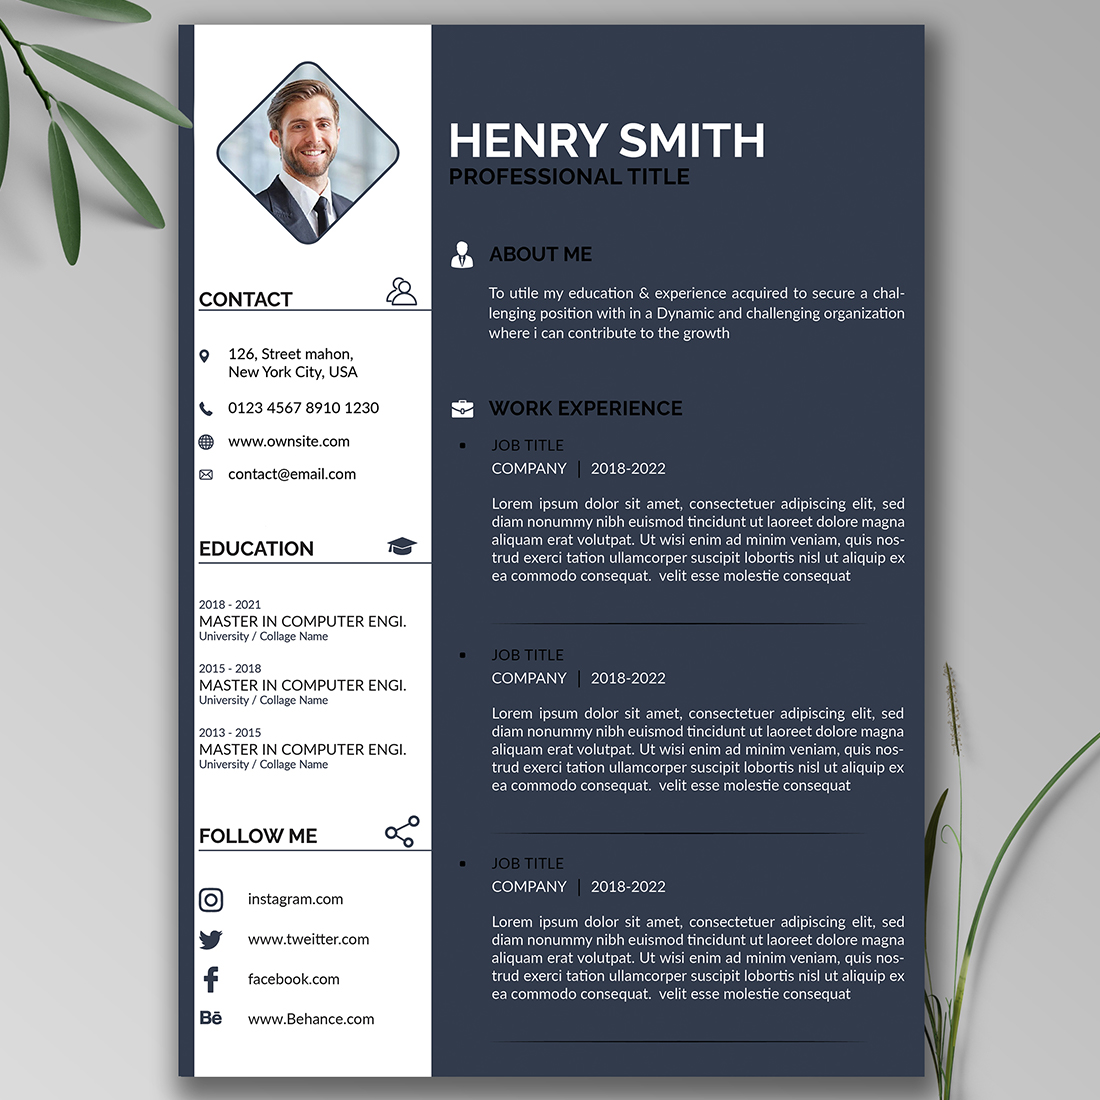 Professional resume with a blue cover.